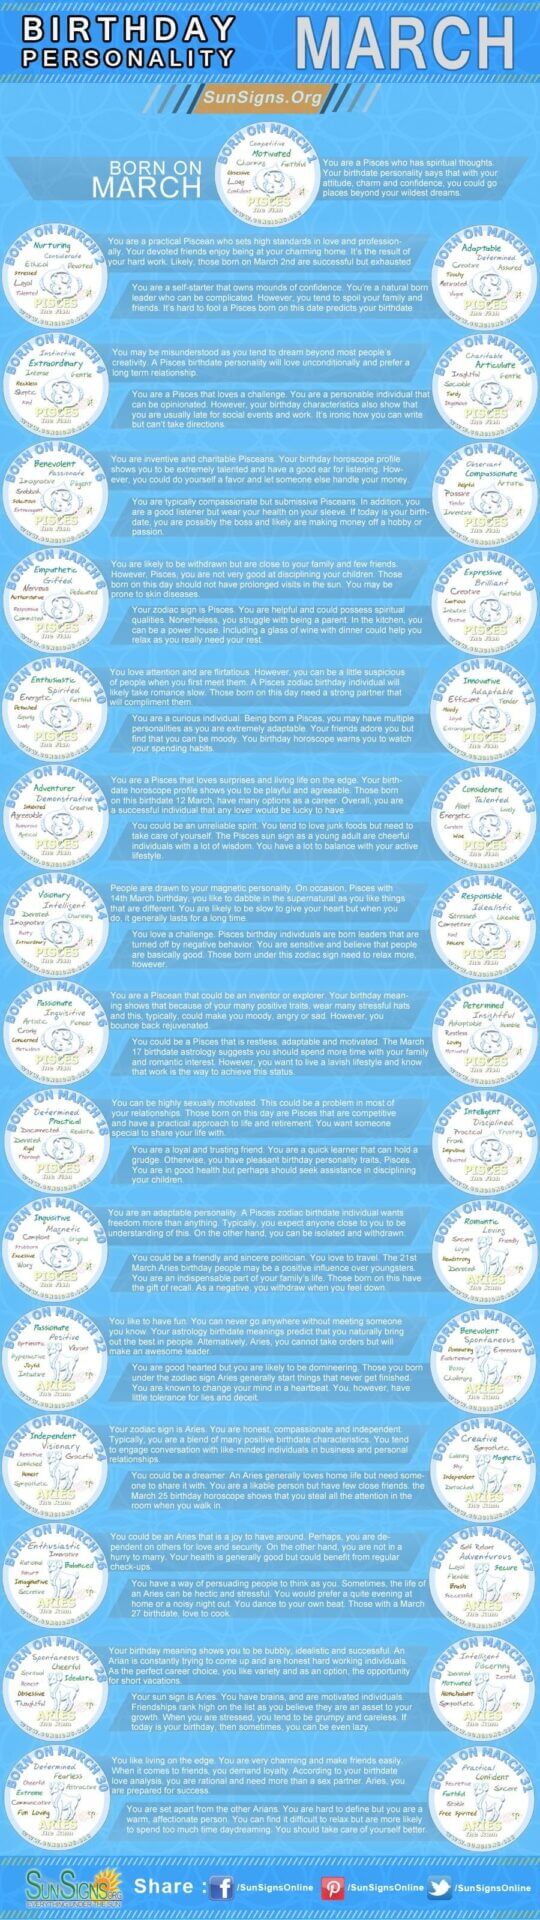 infographics for people born in march. Zodiac sign Pisces and Aries. birthday personality for each day of march. 